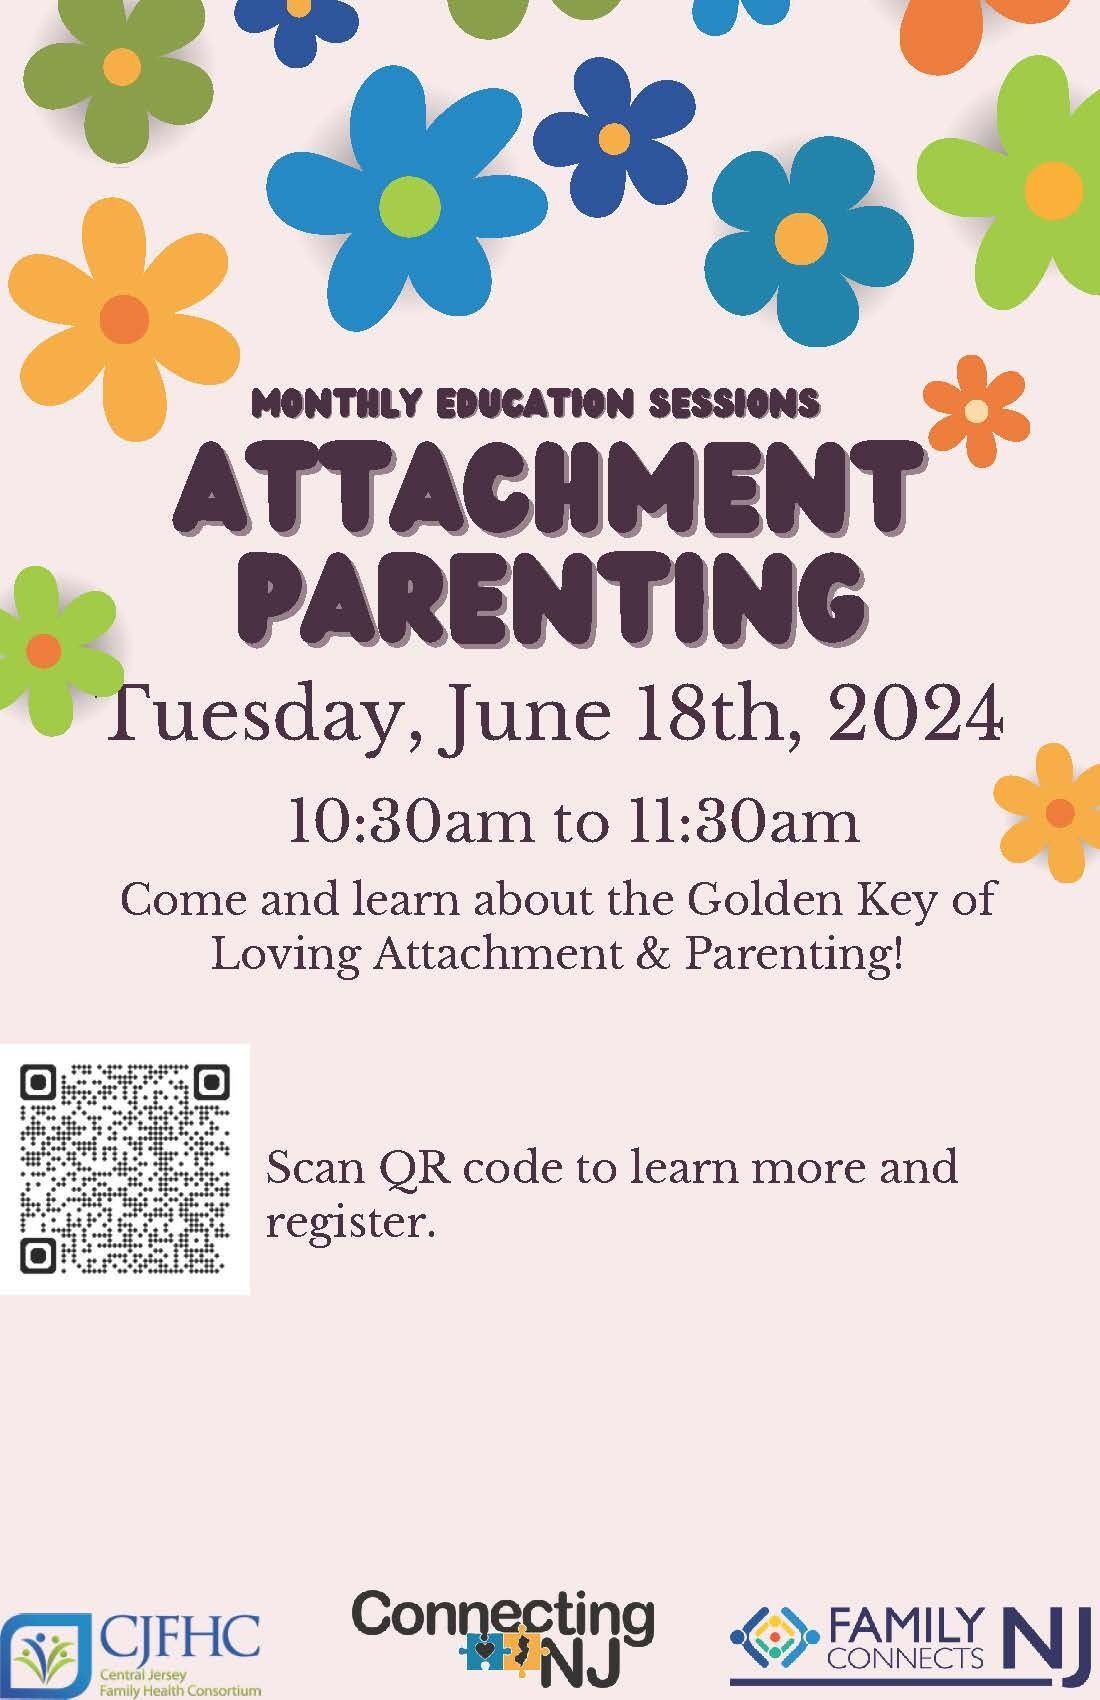 Connecting NJ Attachment Parenting: Tuesday, June 18, 2024